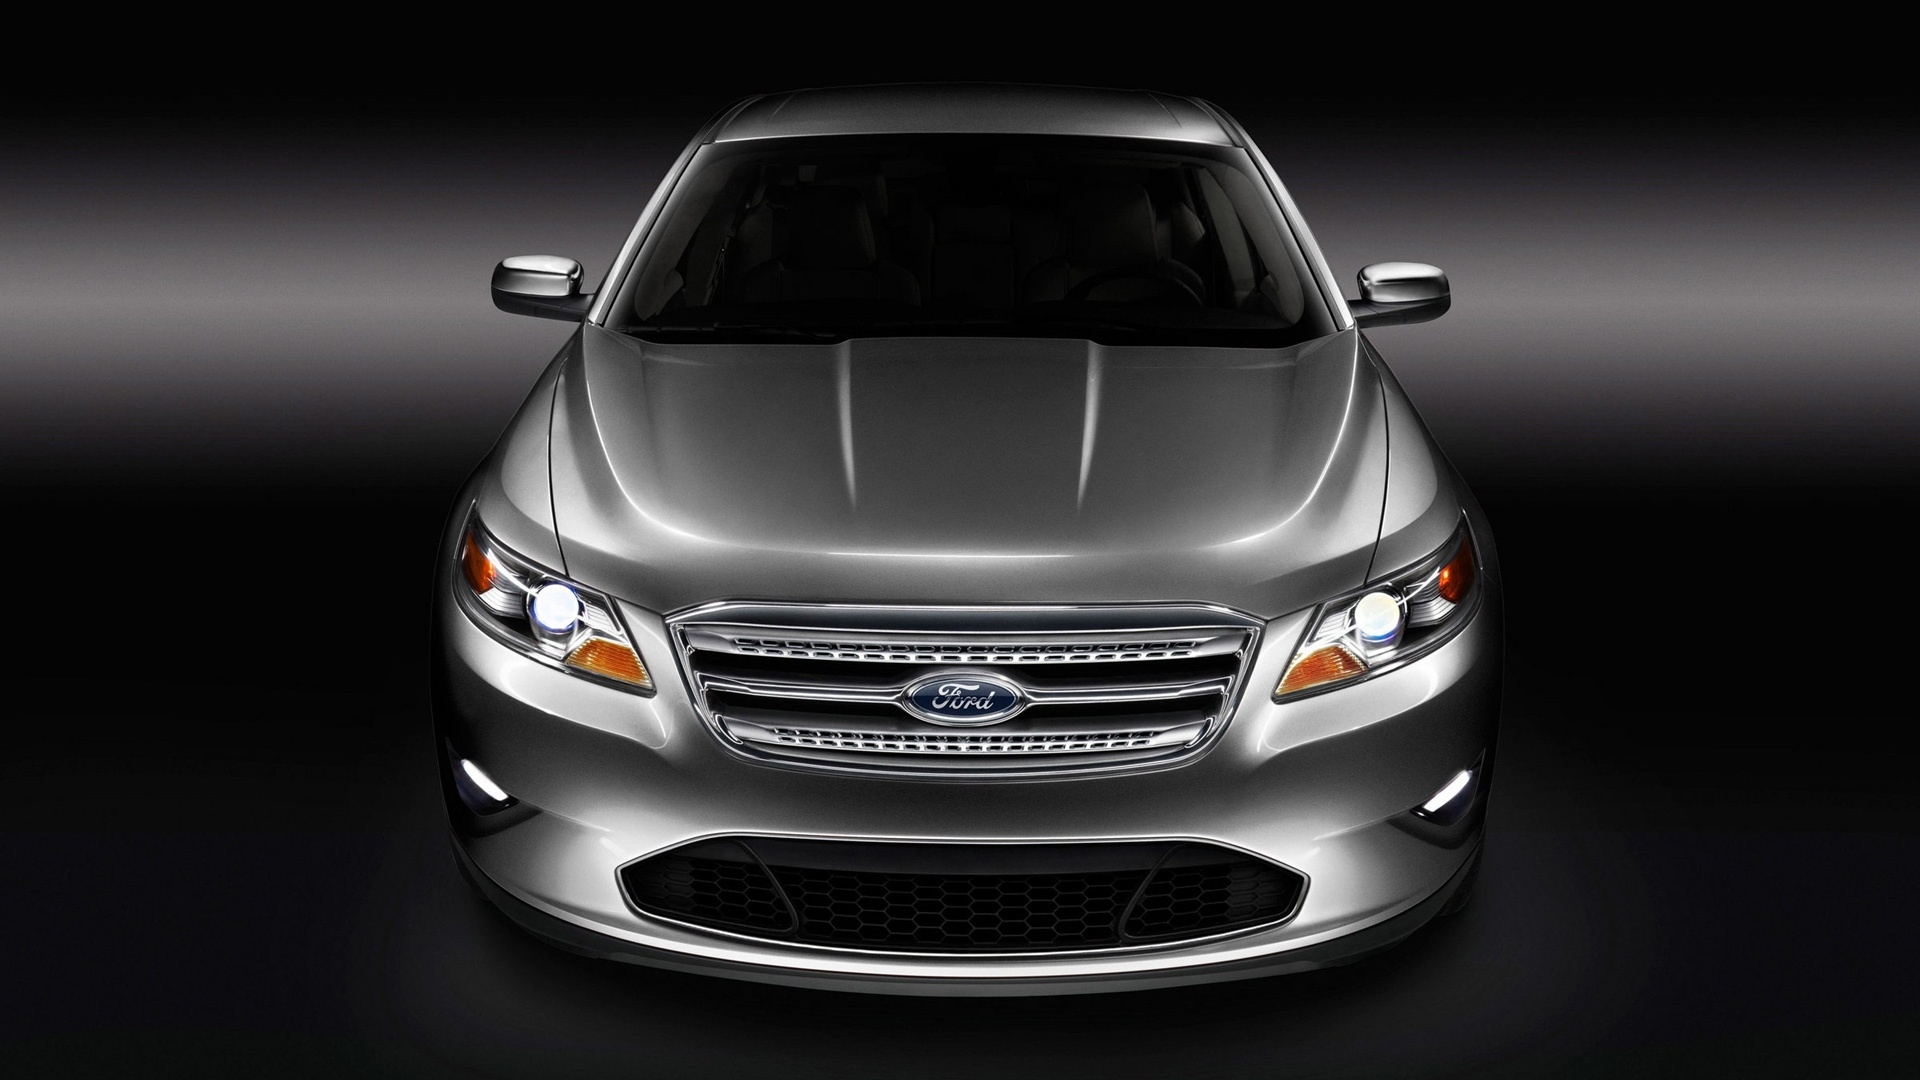 Ford Taurus 2010 for 1920 x 1080 HDTV 1080p resolution